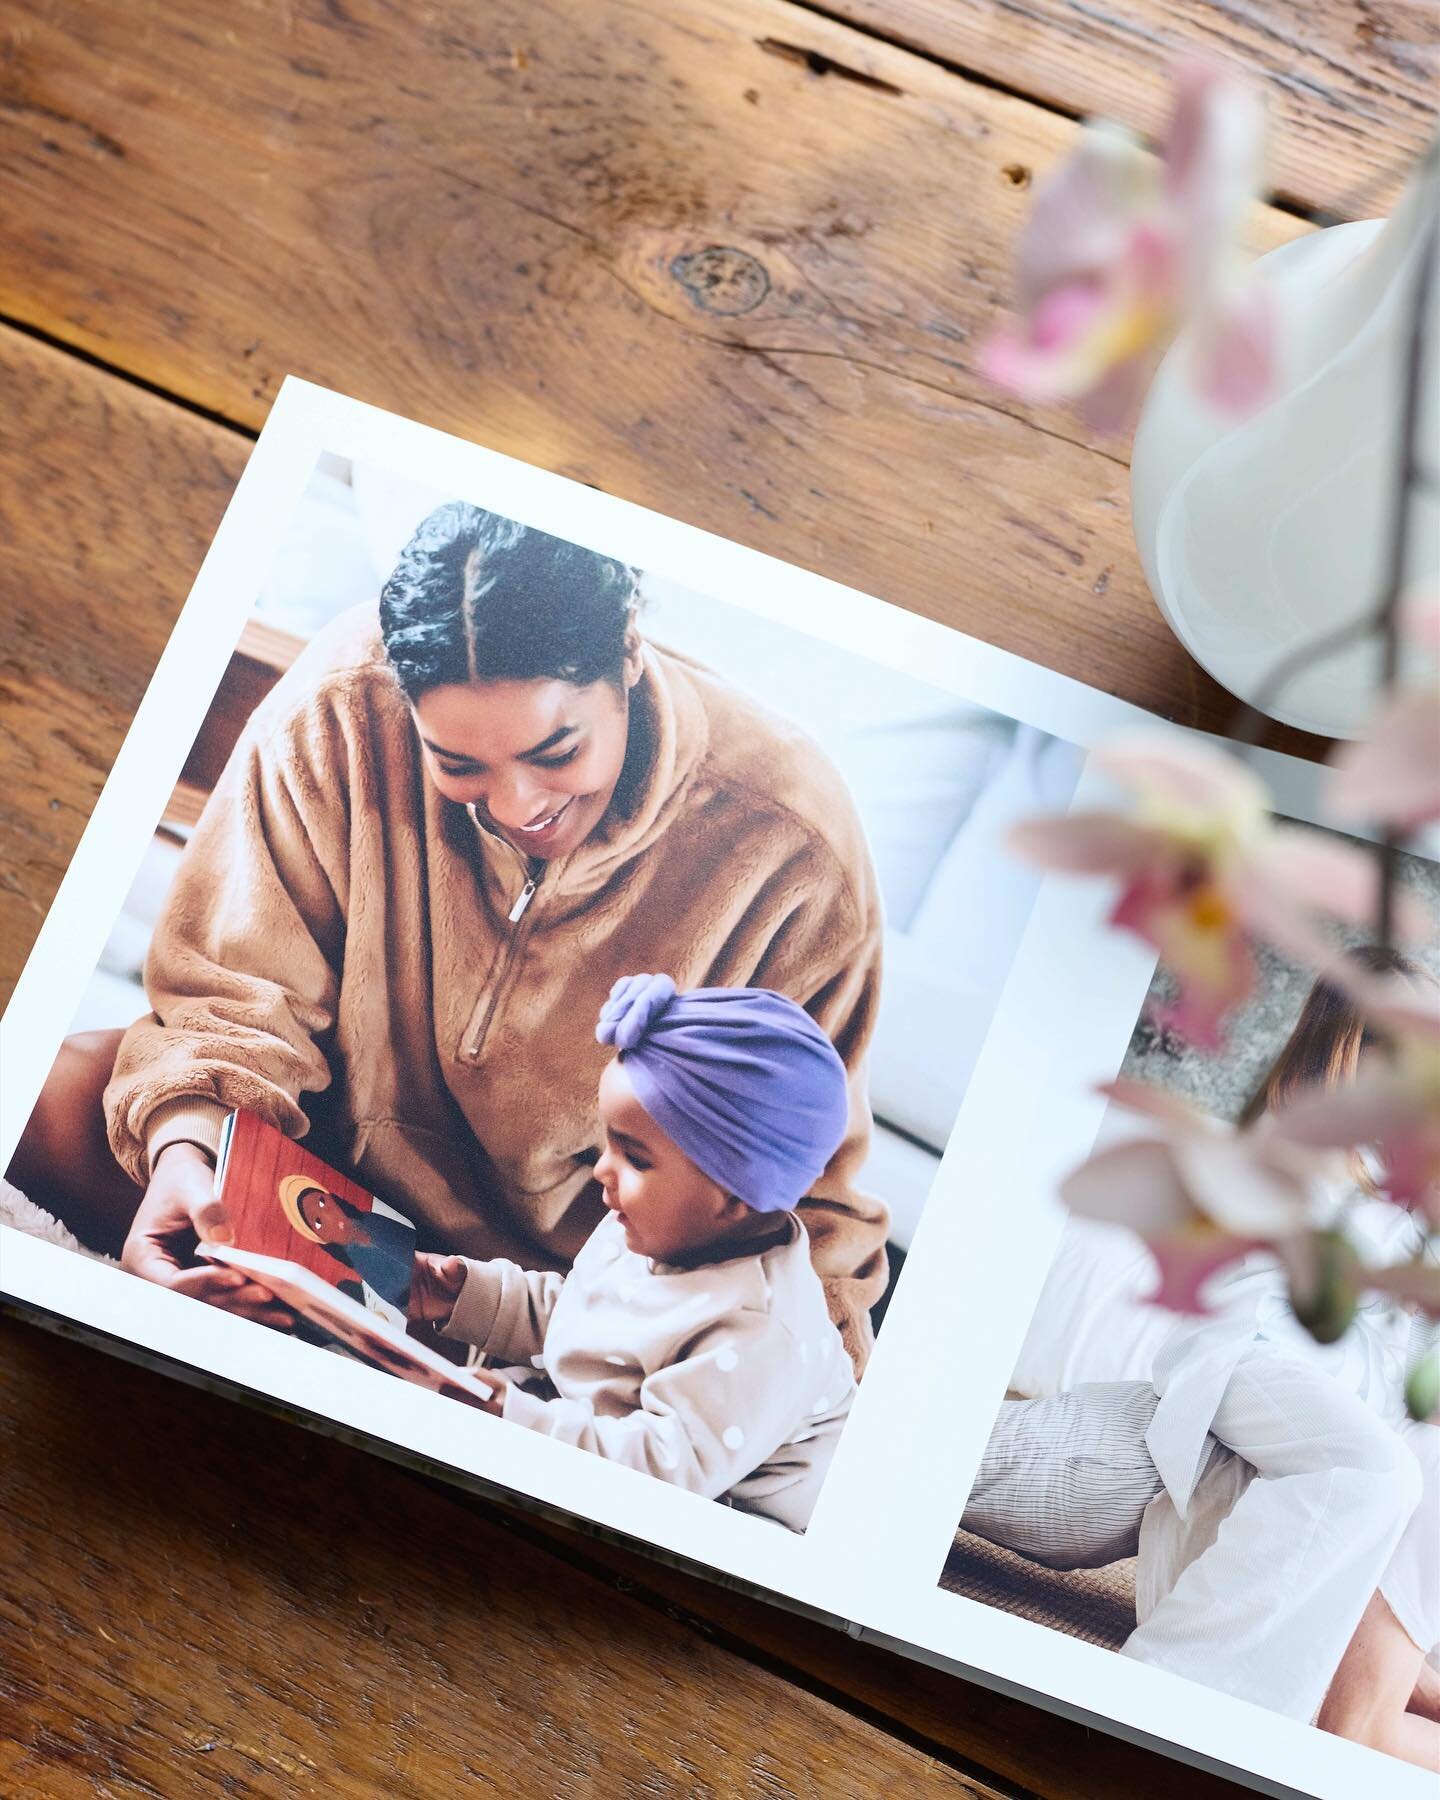 Mother's Day is only 12 days away! Show mom how much you care with a personalized photo book crafted with love. 💐

#photoprinting #photobook #mothersdaygift